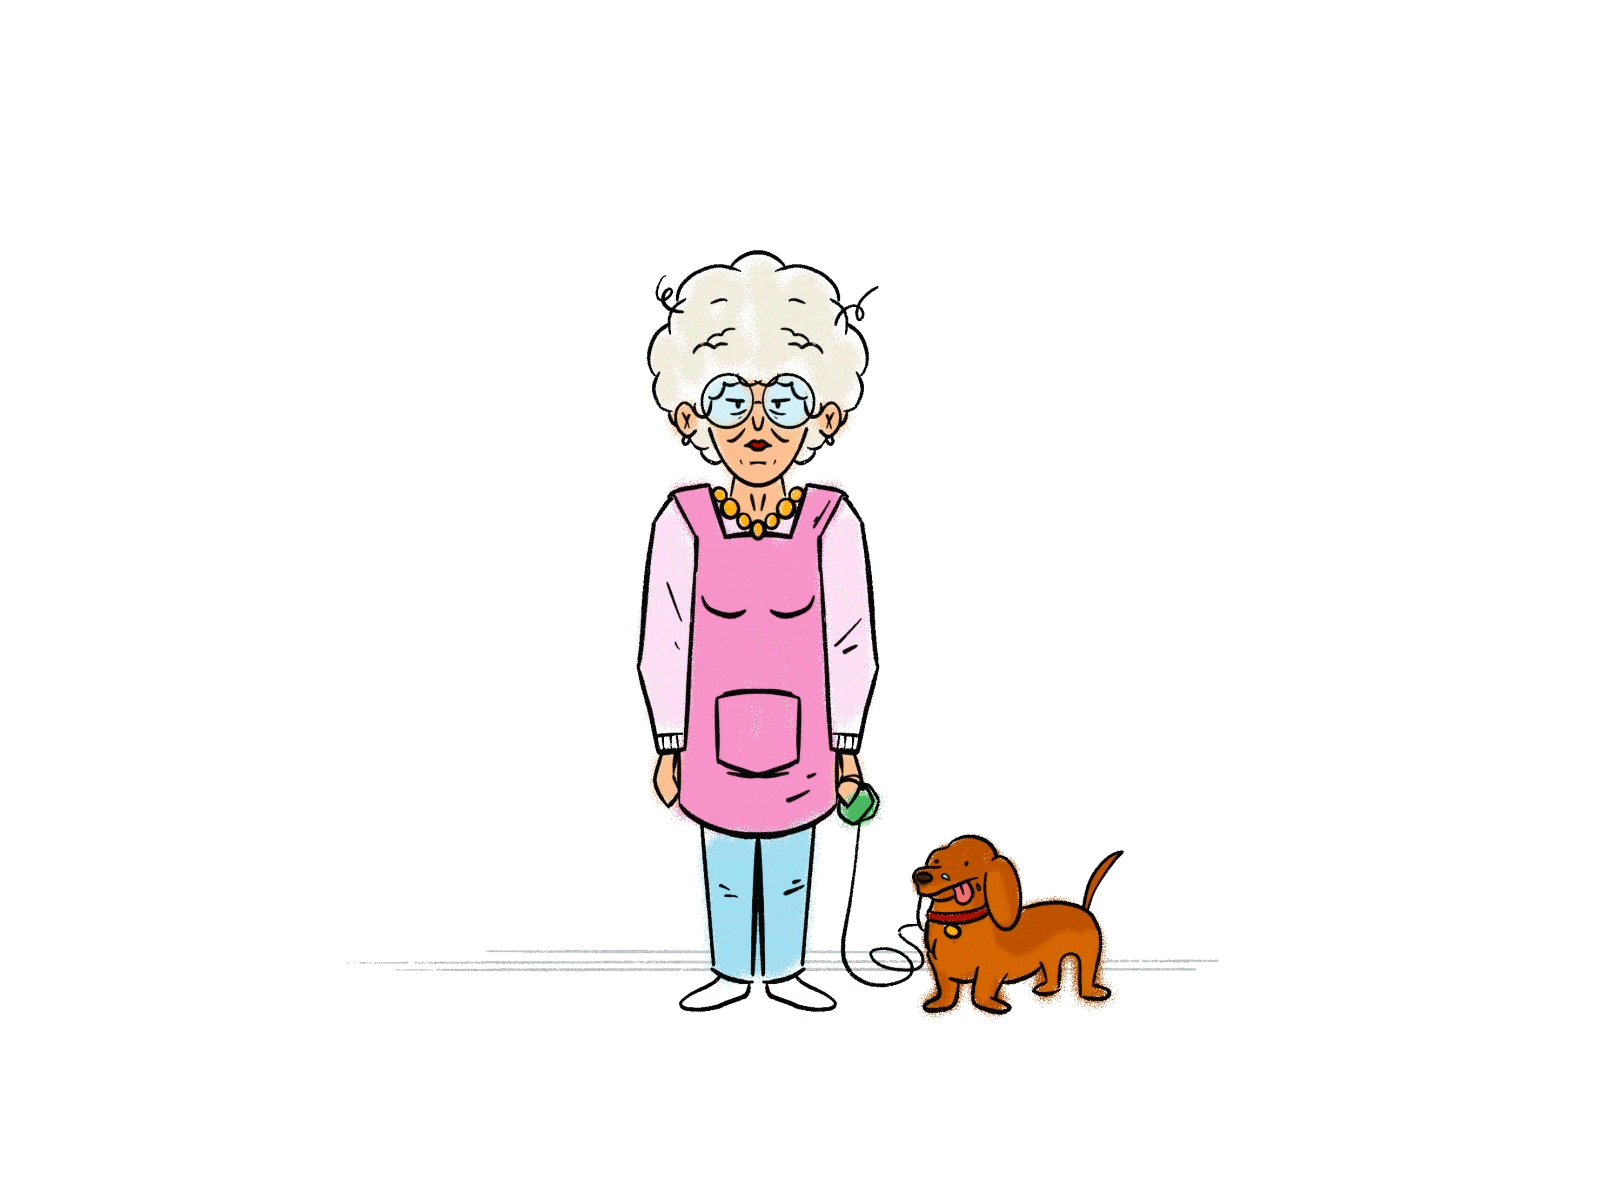 Homppy - The aunt animated animated gif animation aunt branding character character animation character design color design dog draw drawing funny grandmother graphisme illustration shapes work